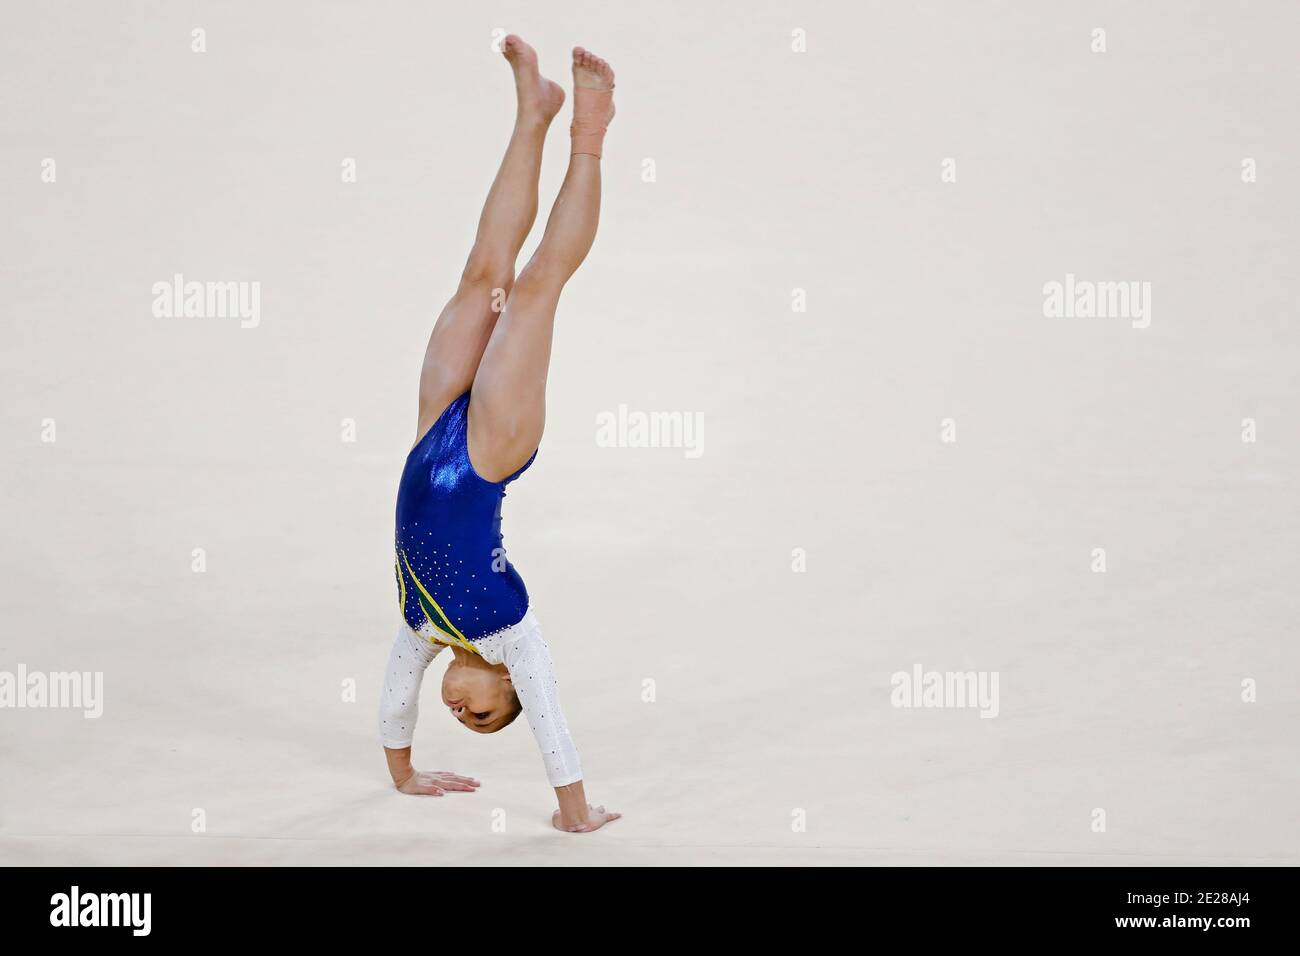 Flavia Saraiva at Rio 2016 Summer Olympic Games artistic gymnastics. Brazilian team ahlete performs vault training session before medal competition Stock Photo